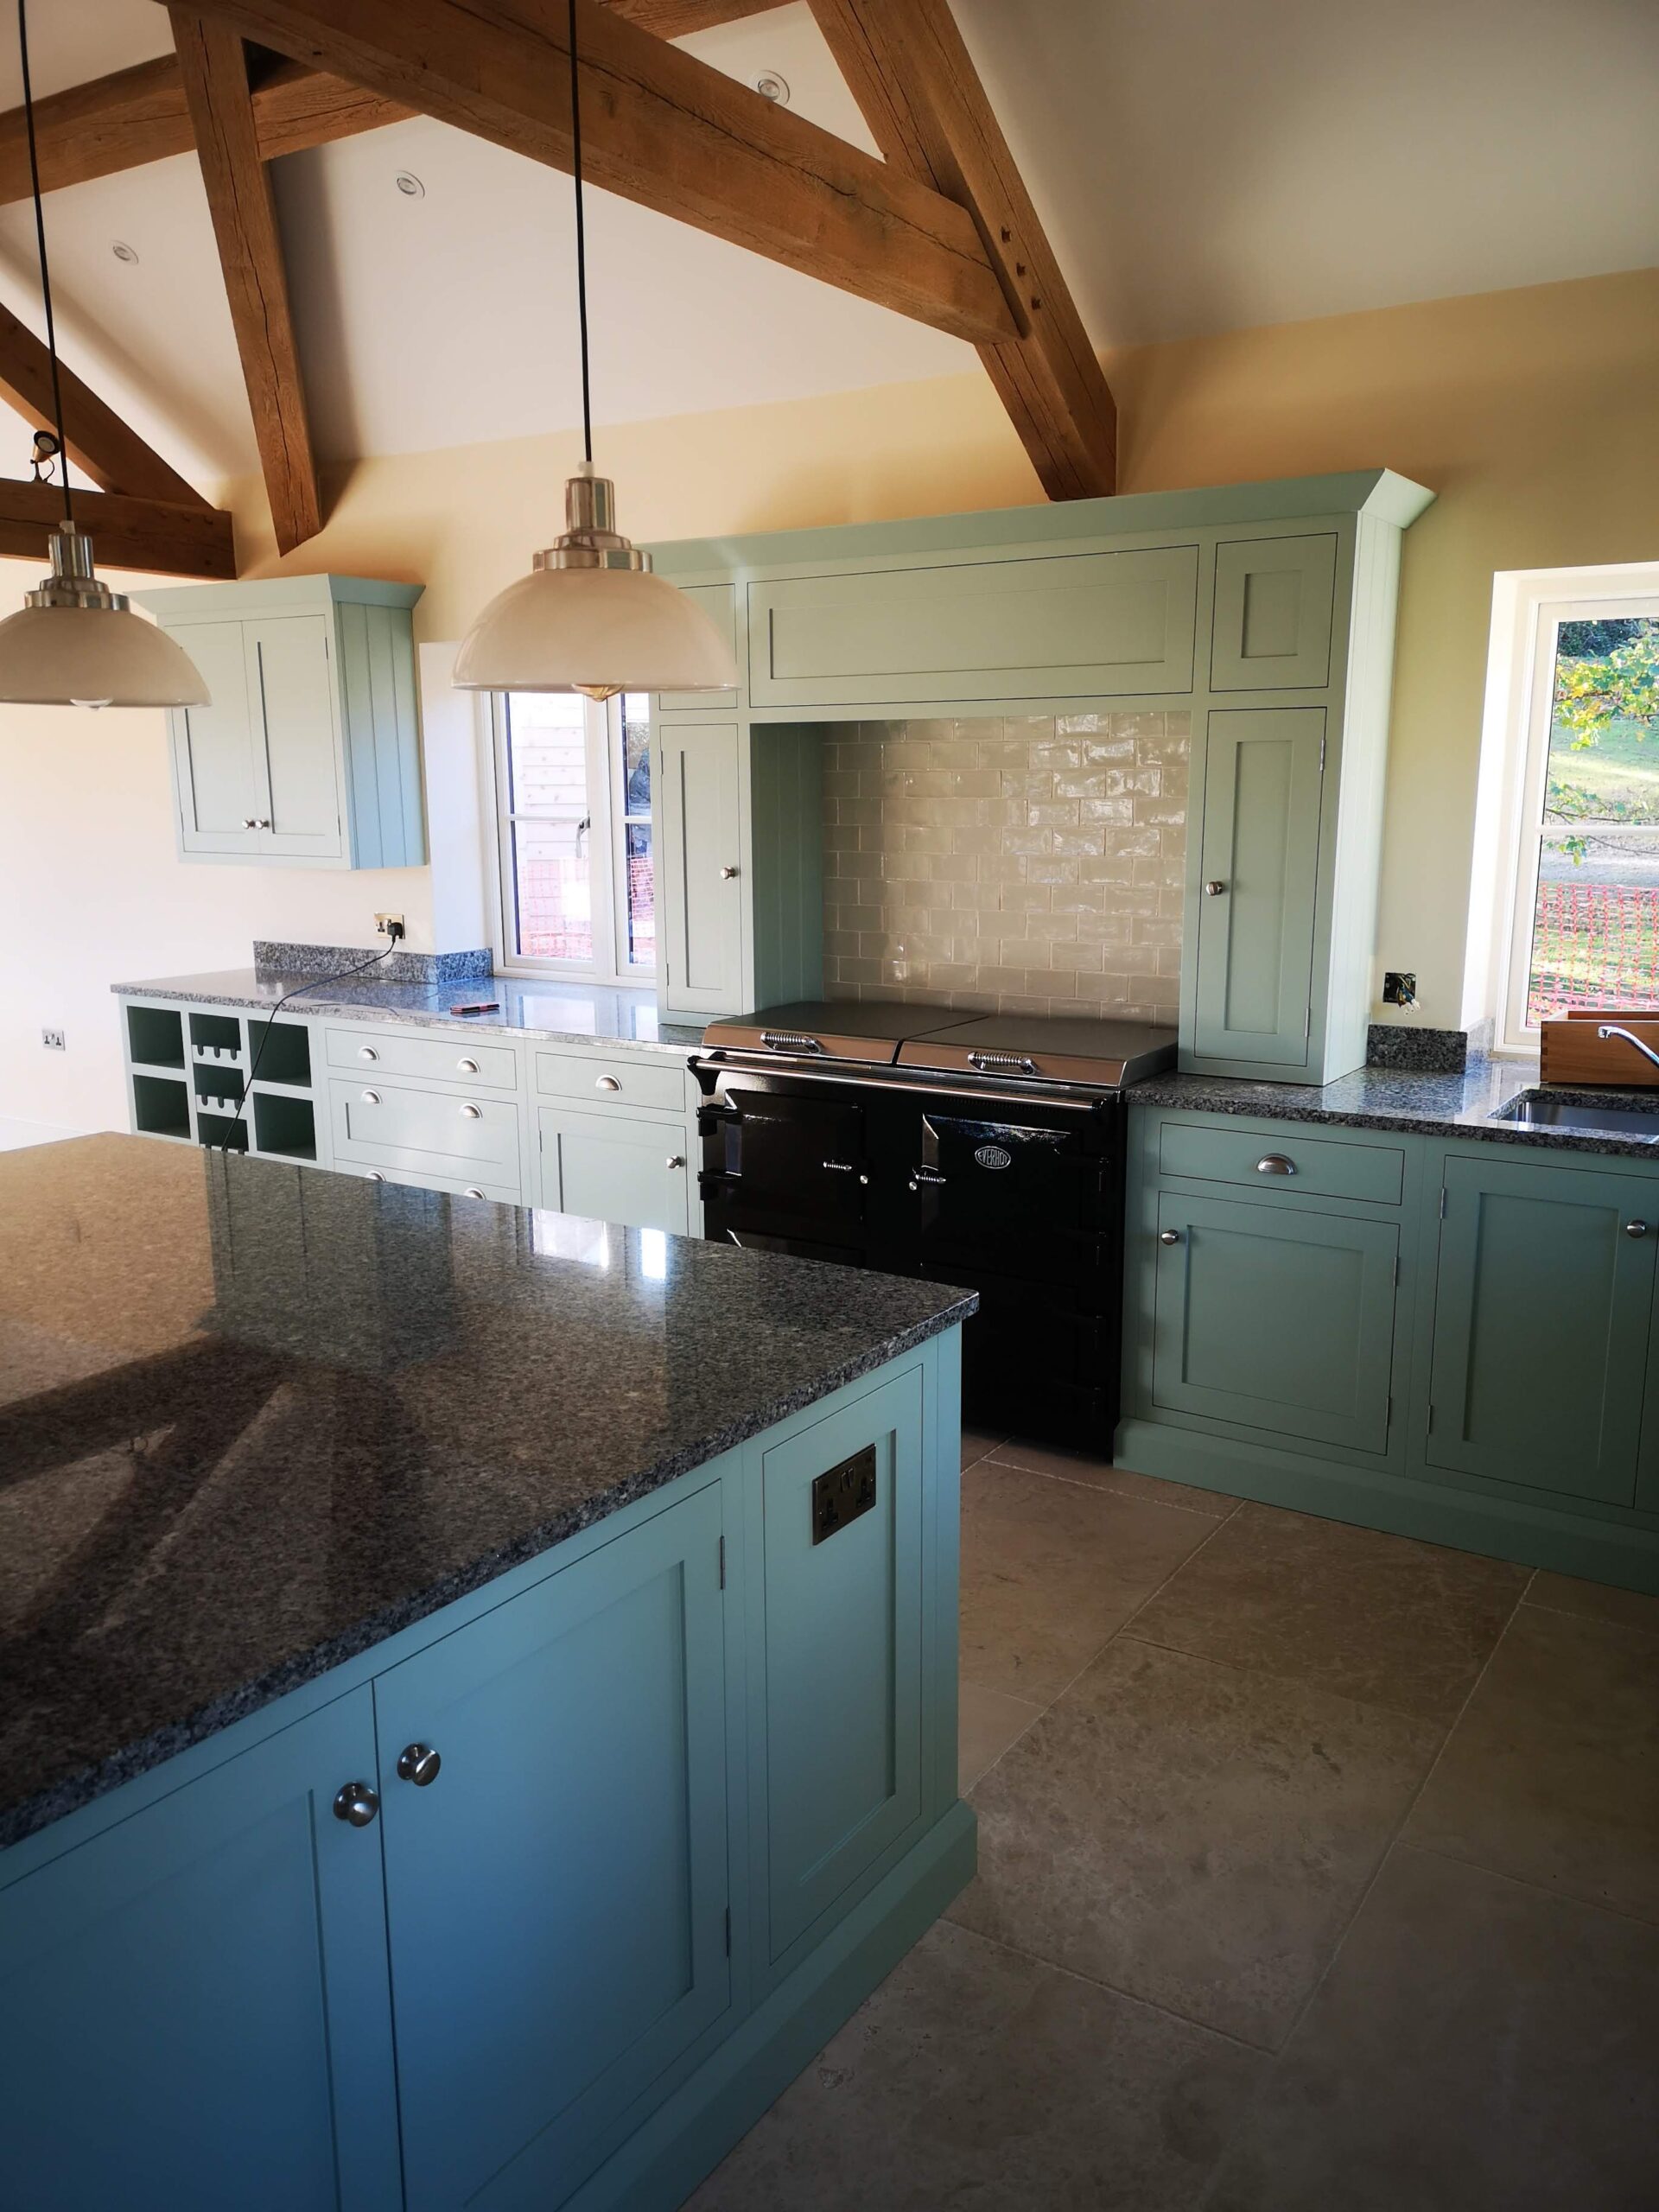 Bespoke kitchen island and units by Kings Stag Joinery